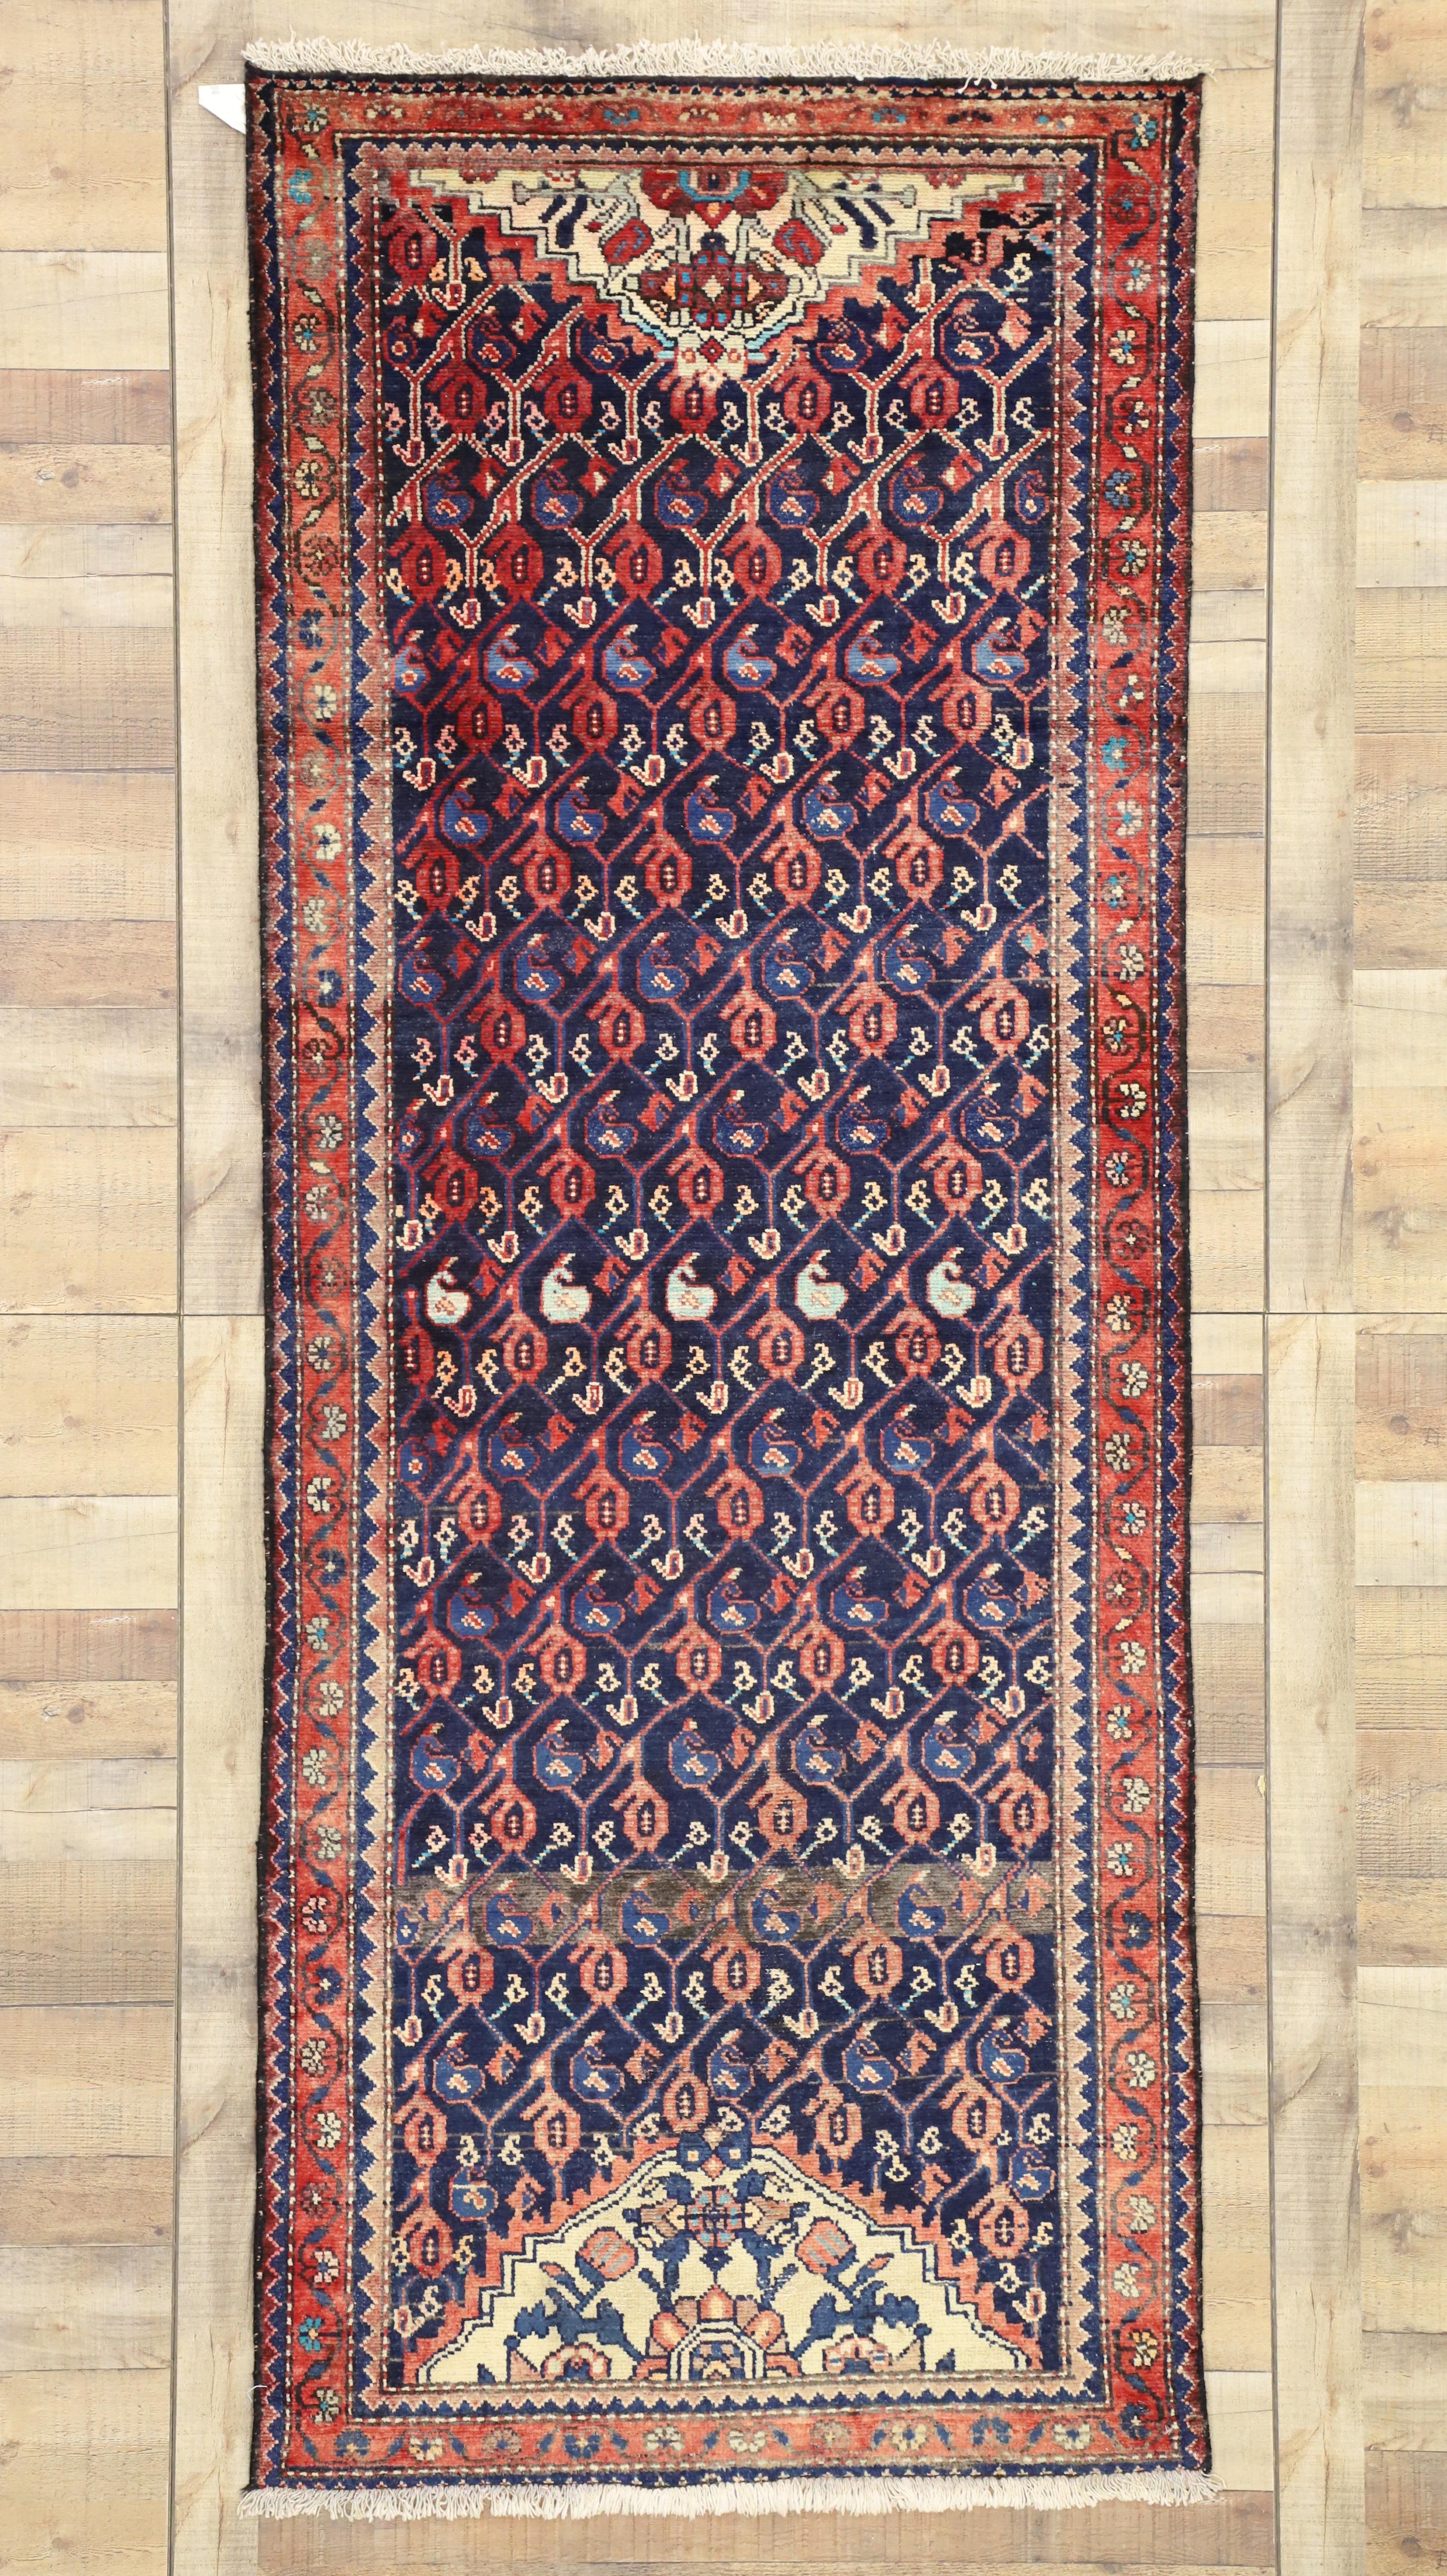 75212 vintage Malayer rug runner. This exquisite example of a Persian Malayer runner features a repeating all-over boteh pattern in variegated shades of blue and red bordered with a replicated meandering flower and vine motif. Featuring a refined